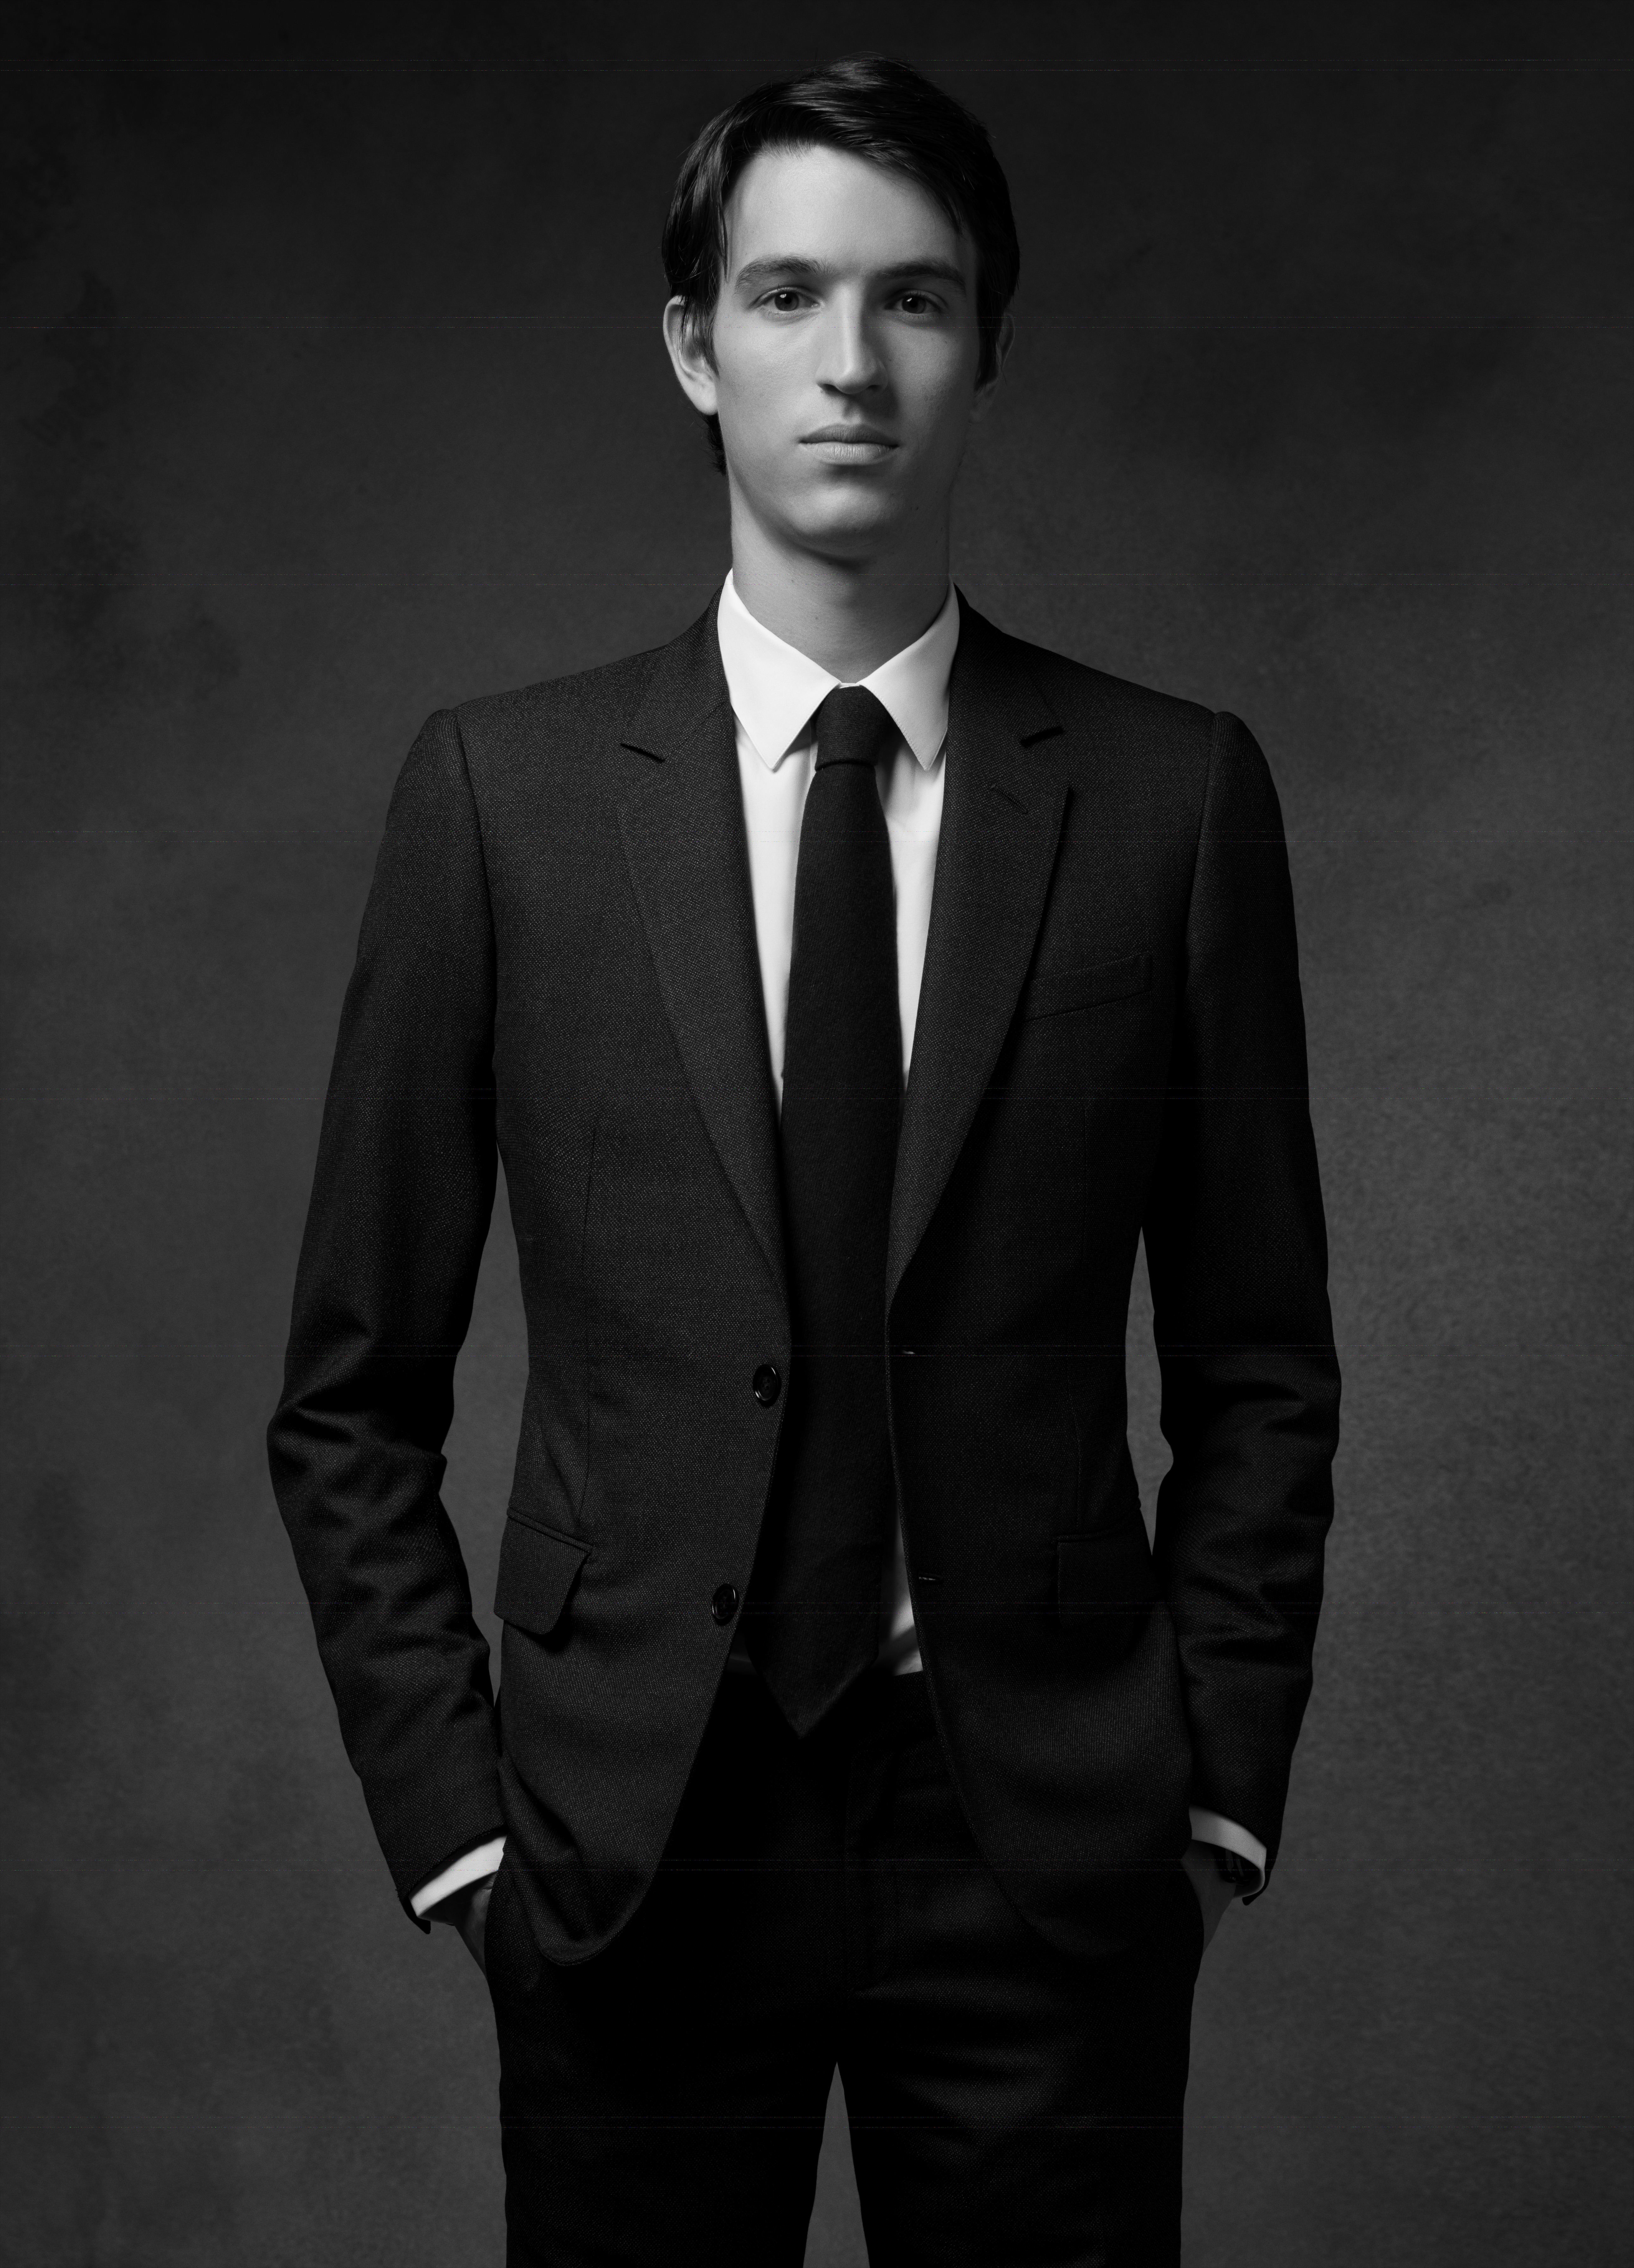 Alexandre Arnault, Executive Vice President of Product and